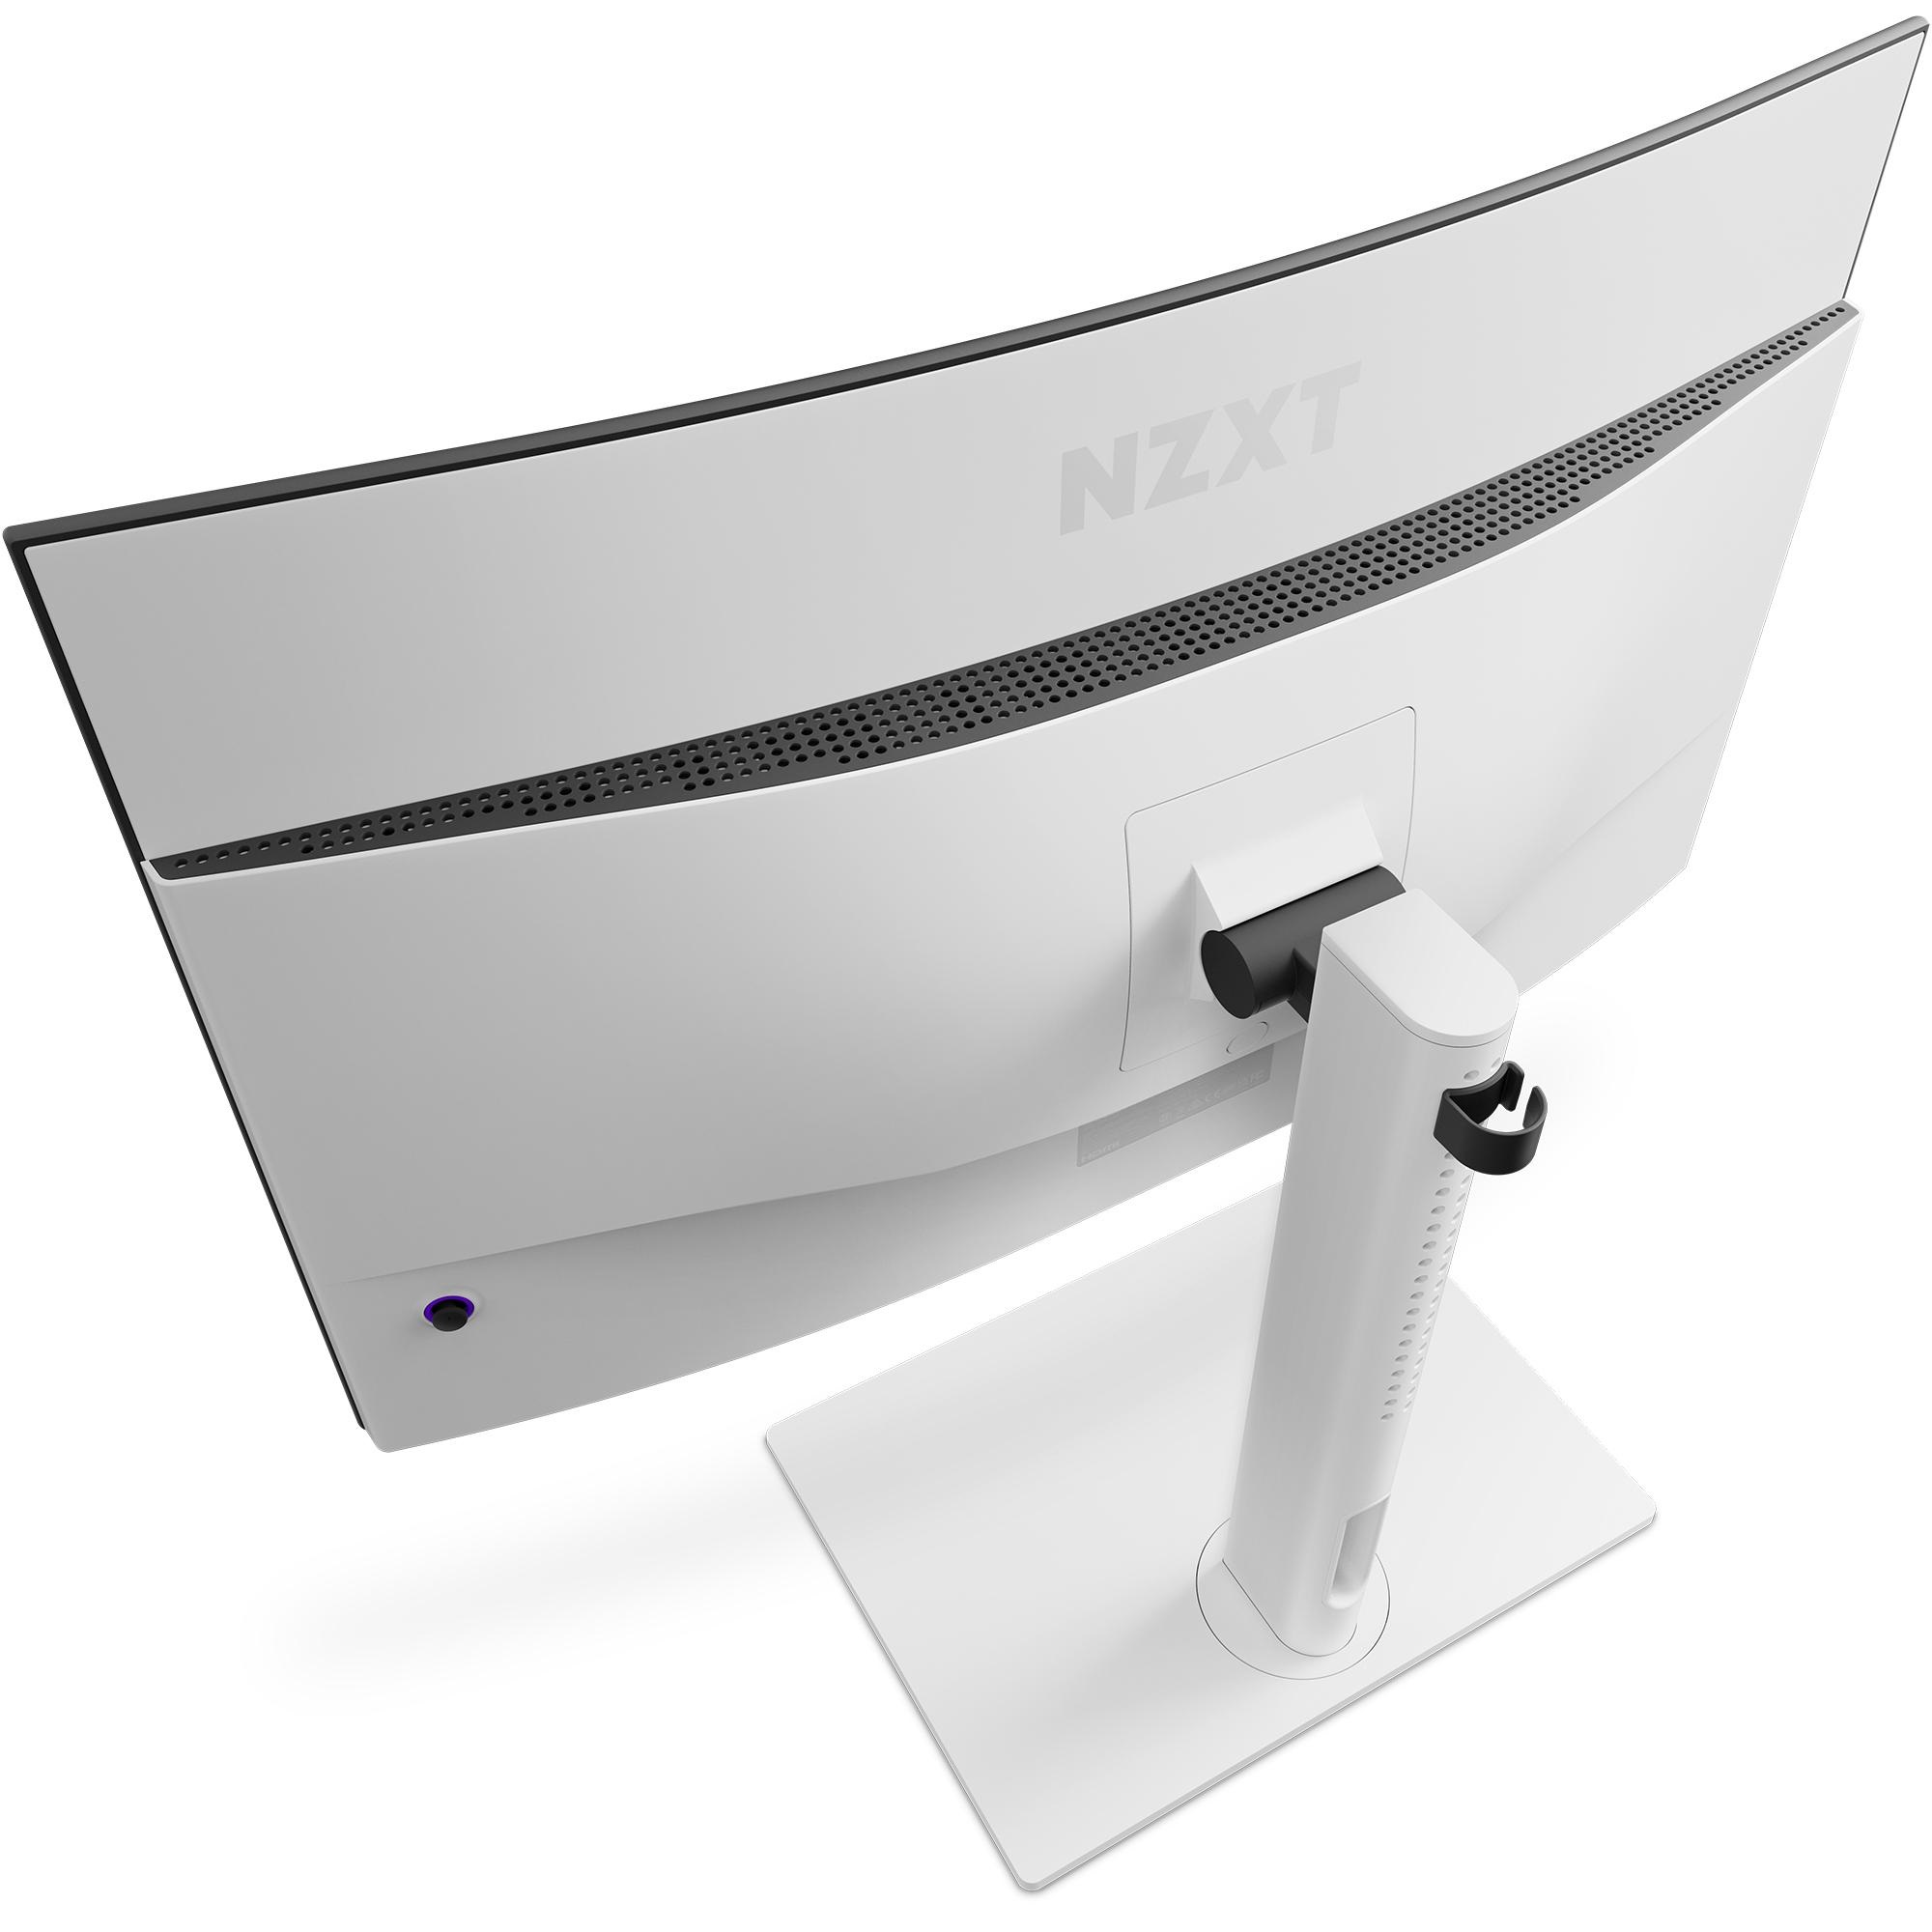 NZXT Canvas QHD 27″ and 32″ Gaming Monitors Review